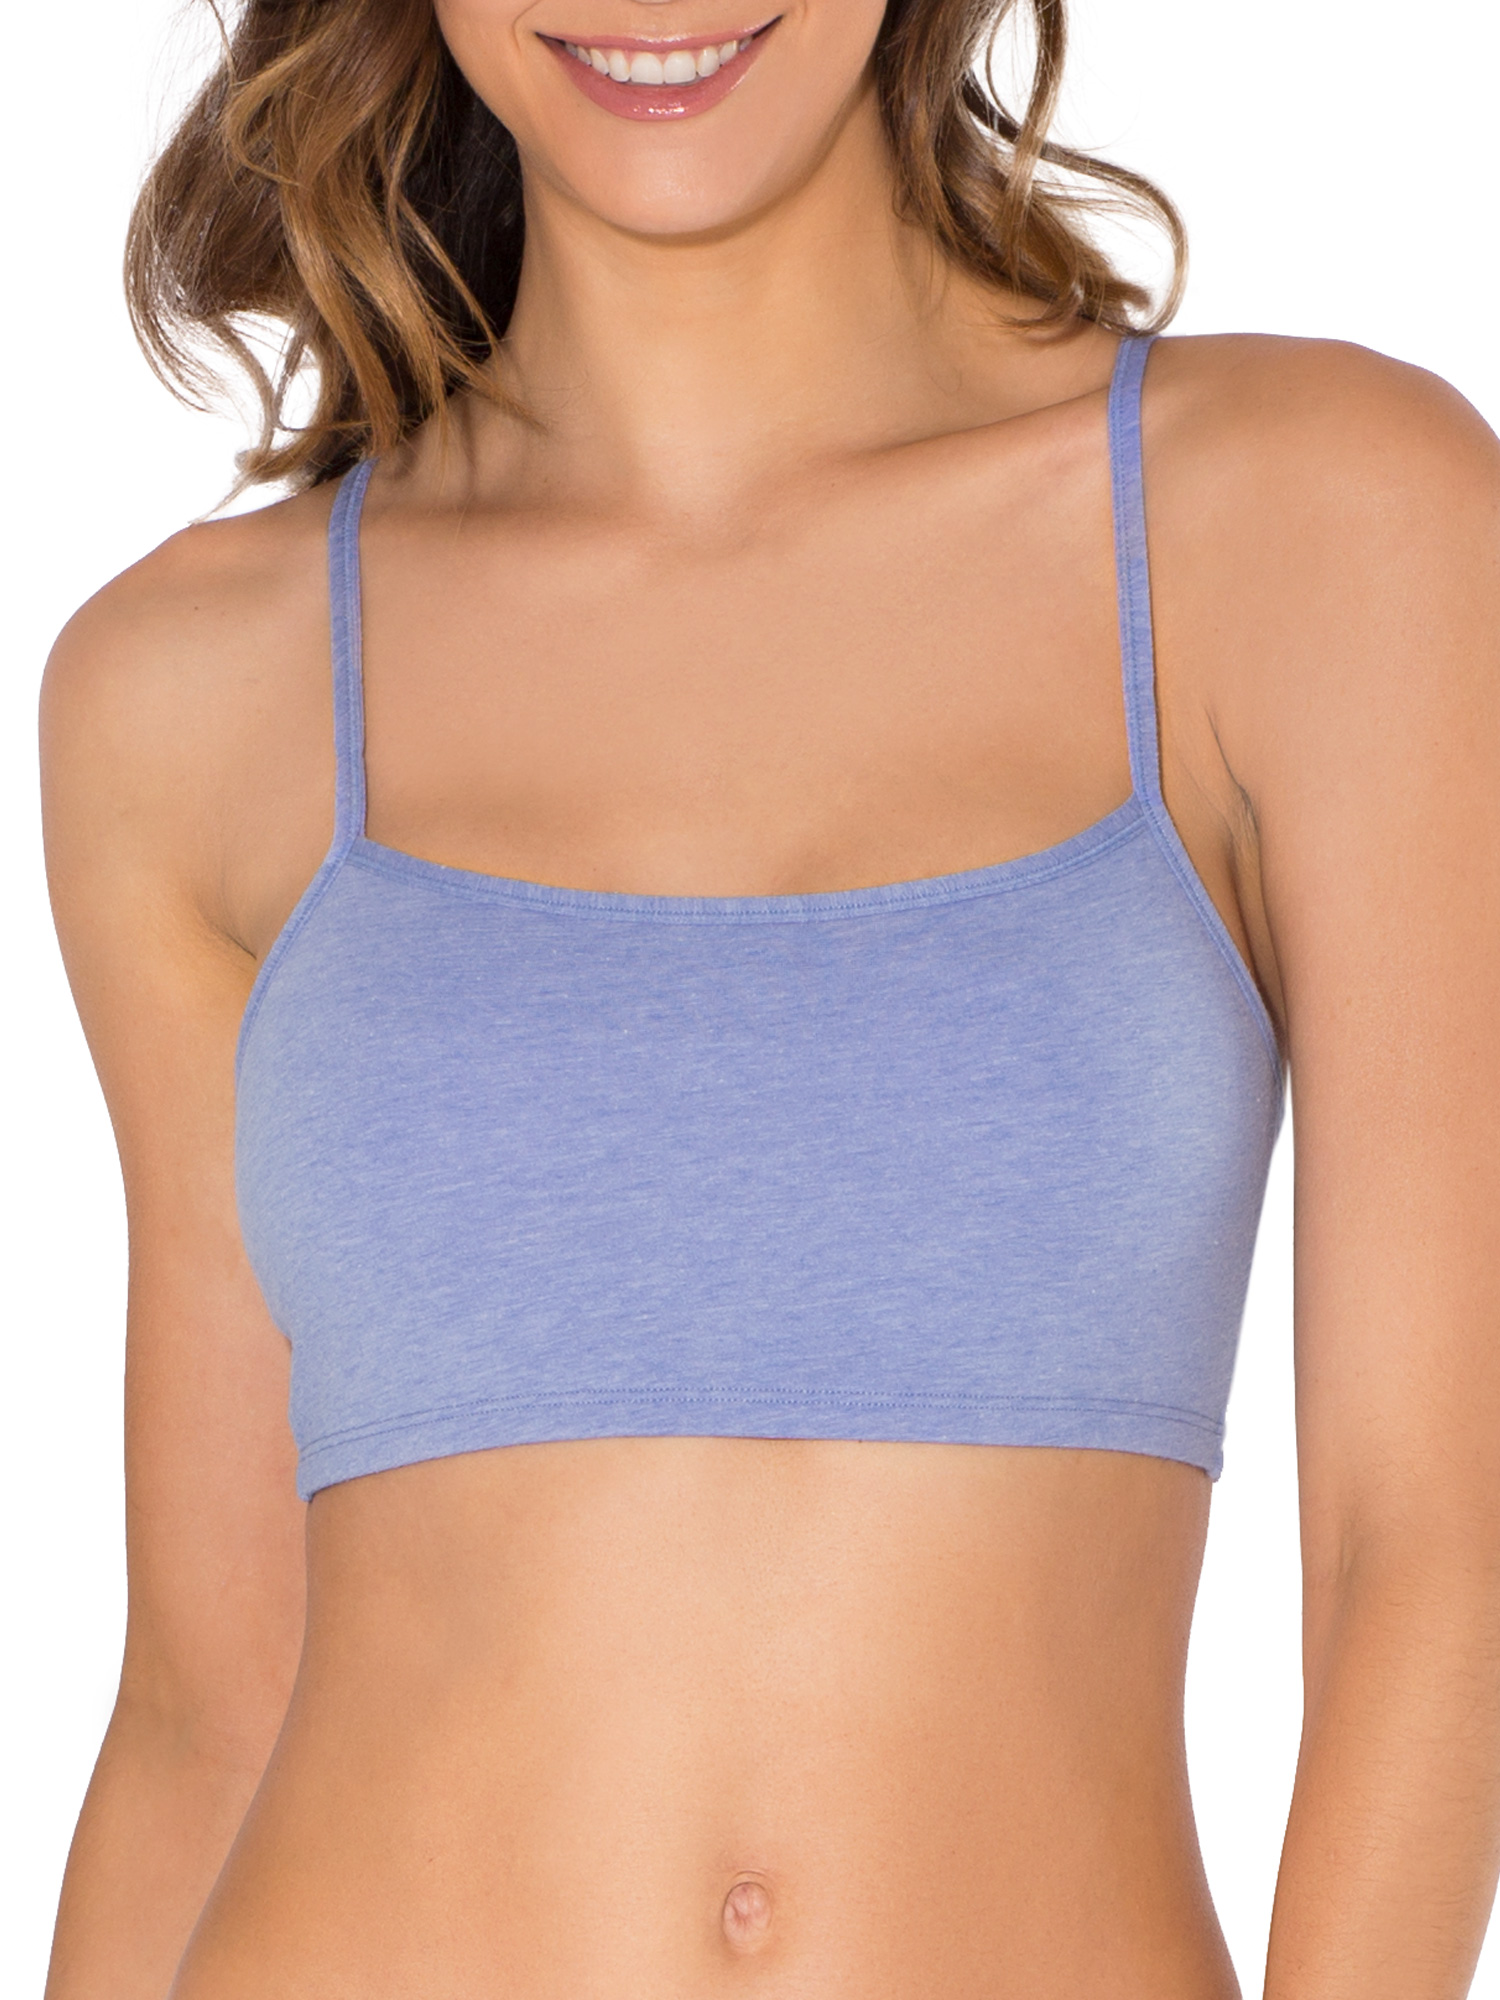 Fruit of the Loom Women's Spaghetti Strap Cotton Sports Bra, 3-Pack, Style-9036 - image 2 of 9